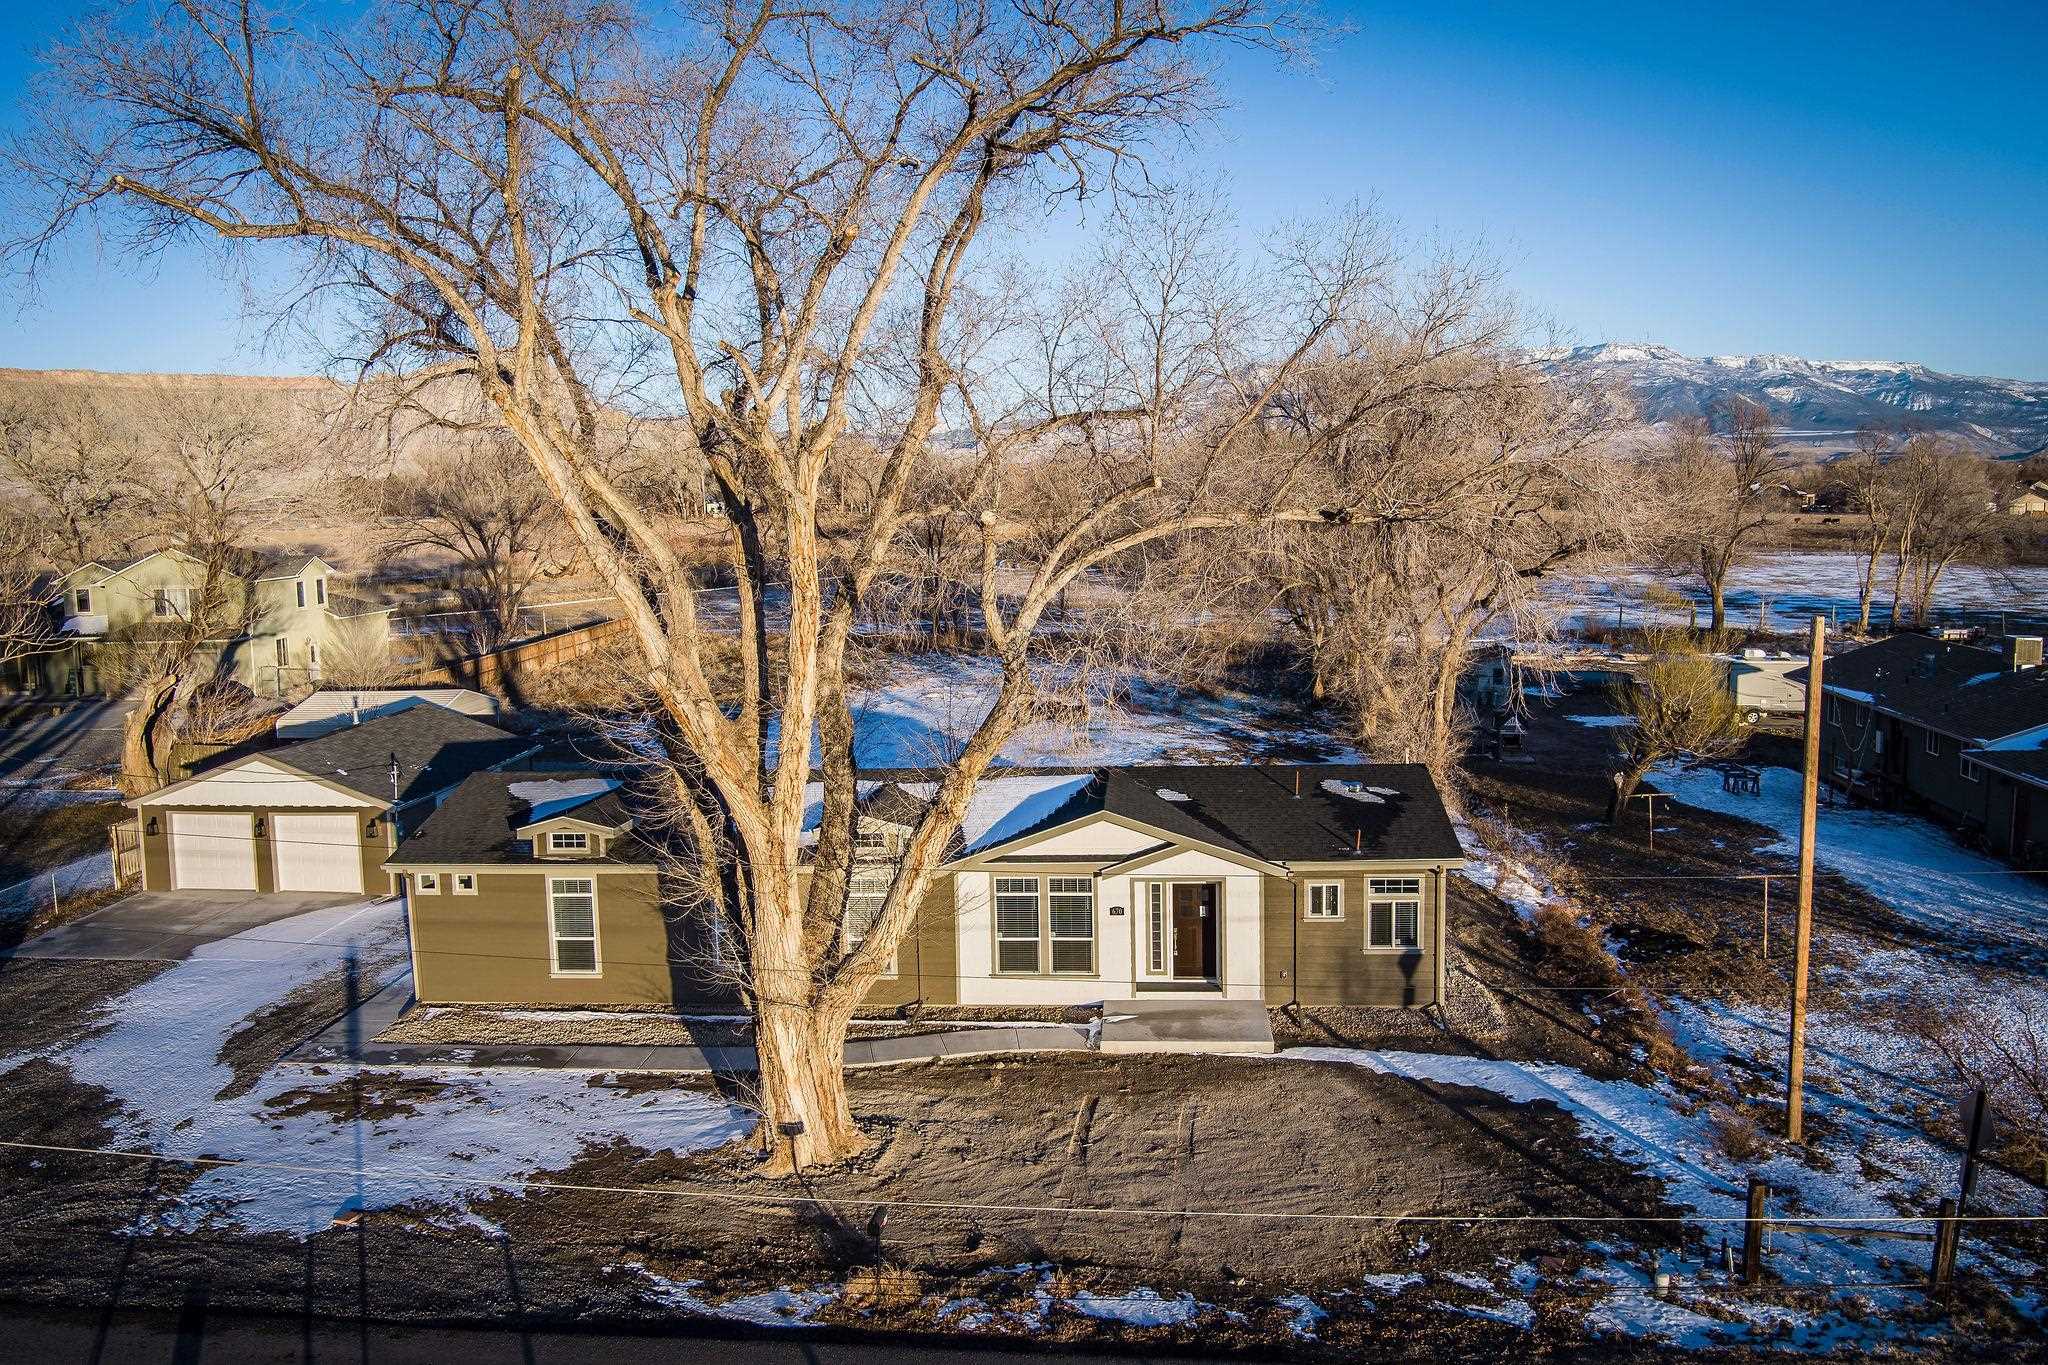 670 30 1/2 Road, Grand Junction, CO 81504